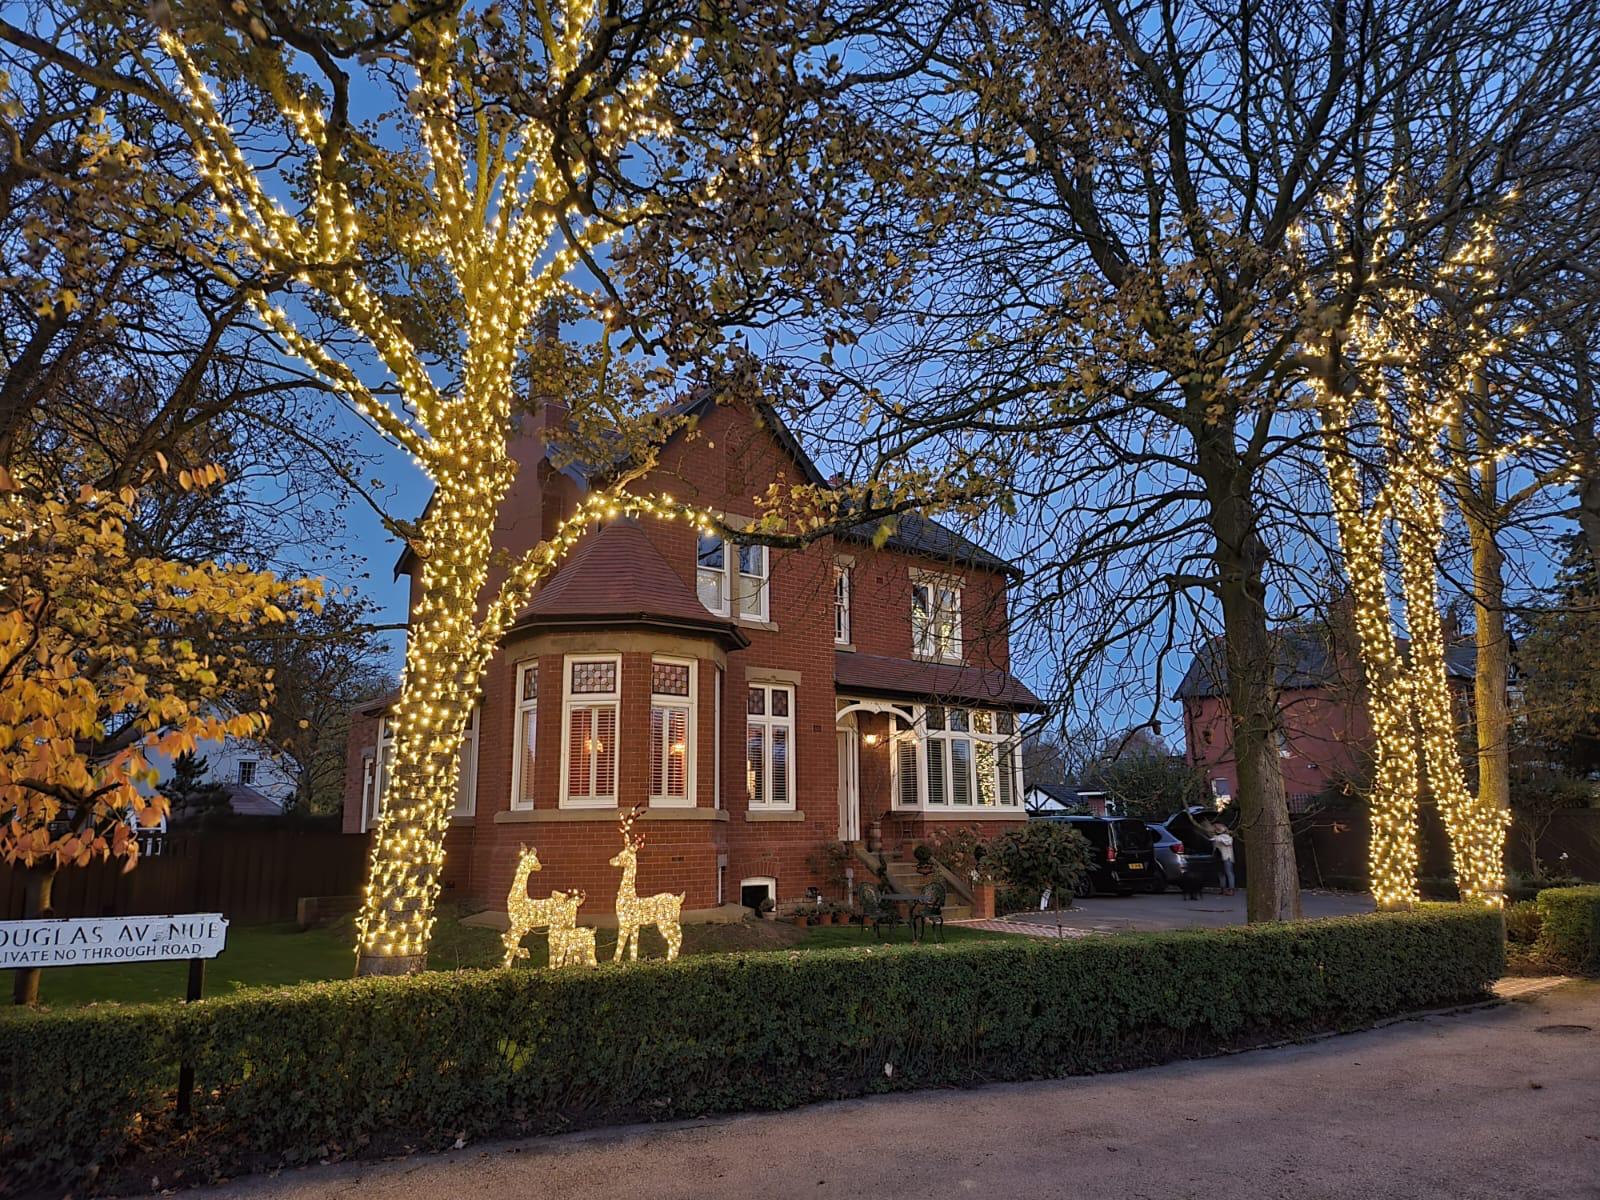 A beautifully renovated home in Hesketh Bank in Lancashire has brought huge smiles to peoples faces thanks to over 20,000 lights in the trees outside which were installed by IllumiDex UK Ltd